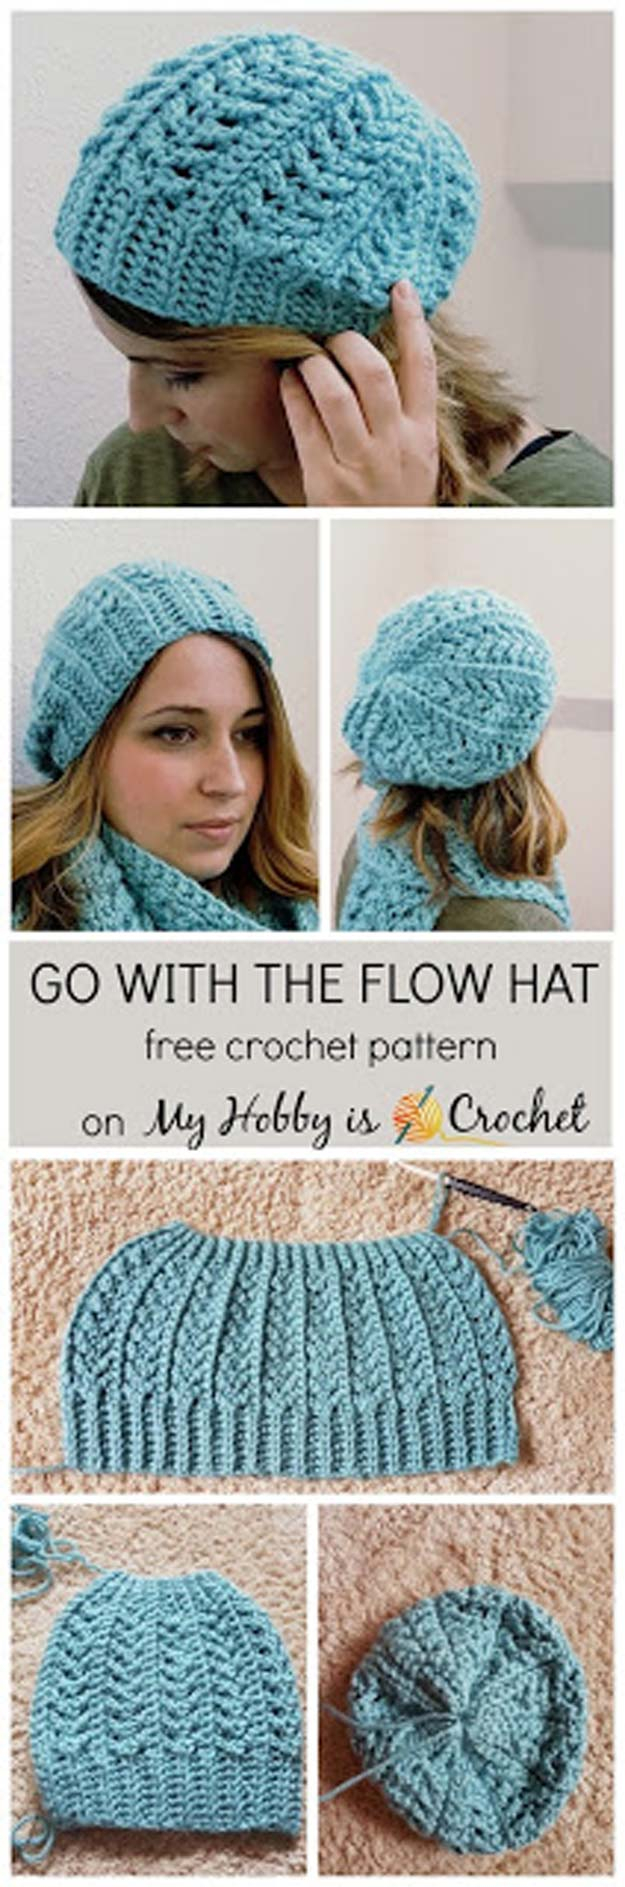 Begginer Crochet Projects Easy Patterns 45 Fun And Easy Crochet Projects